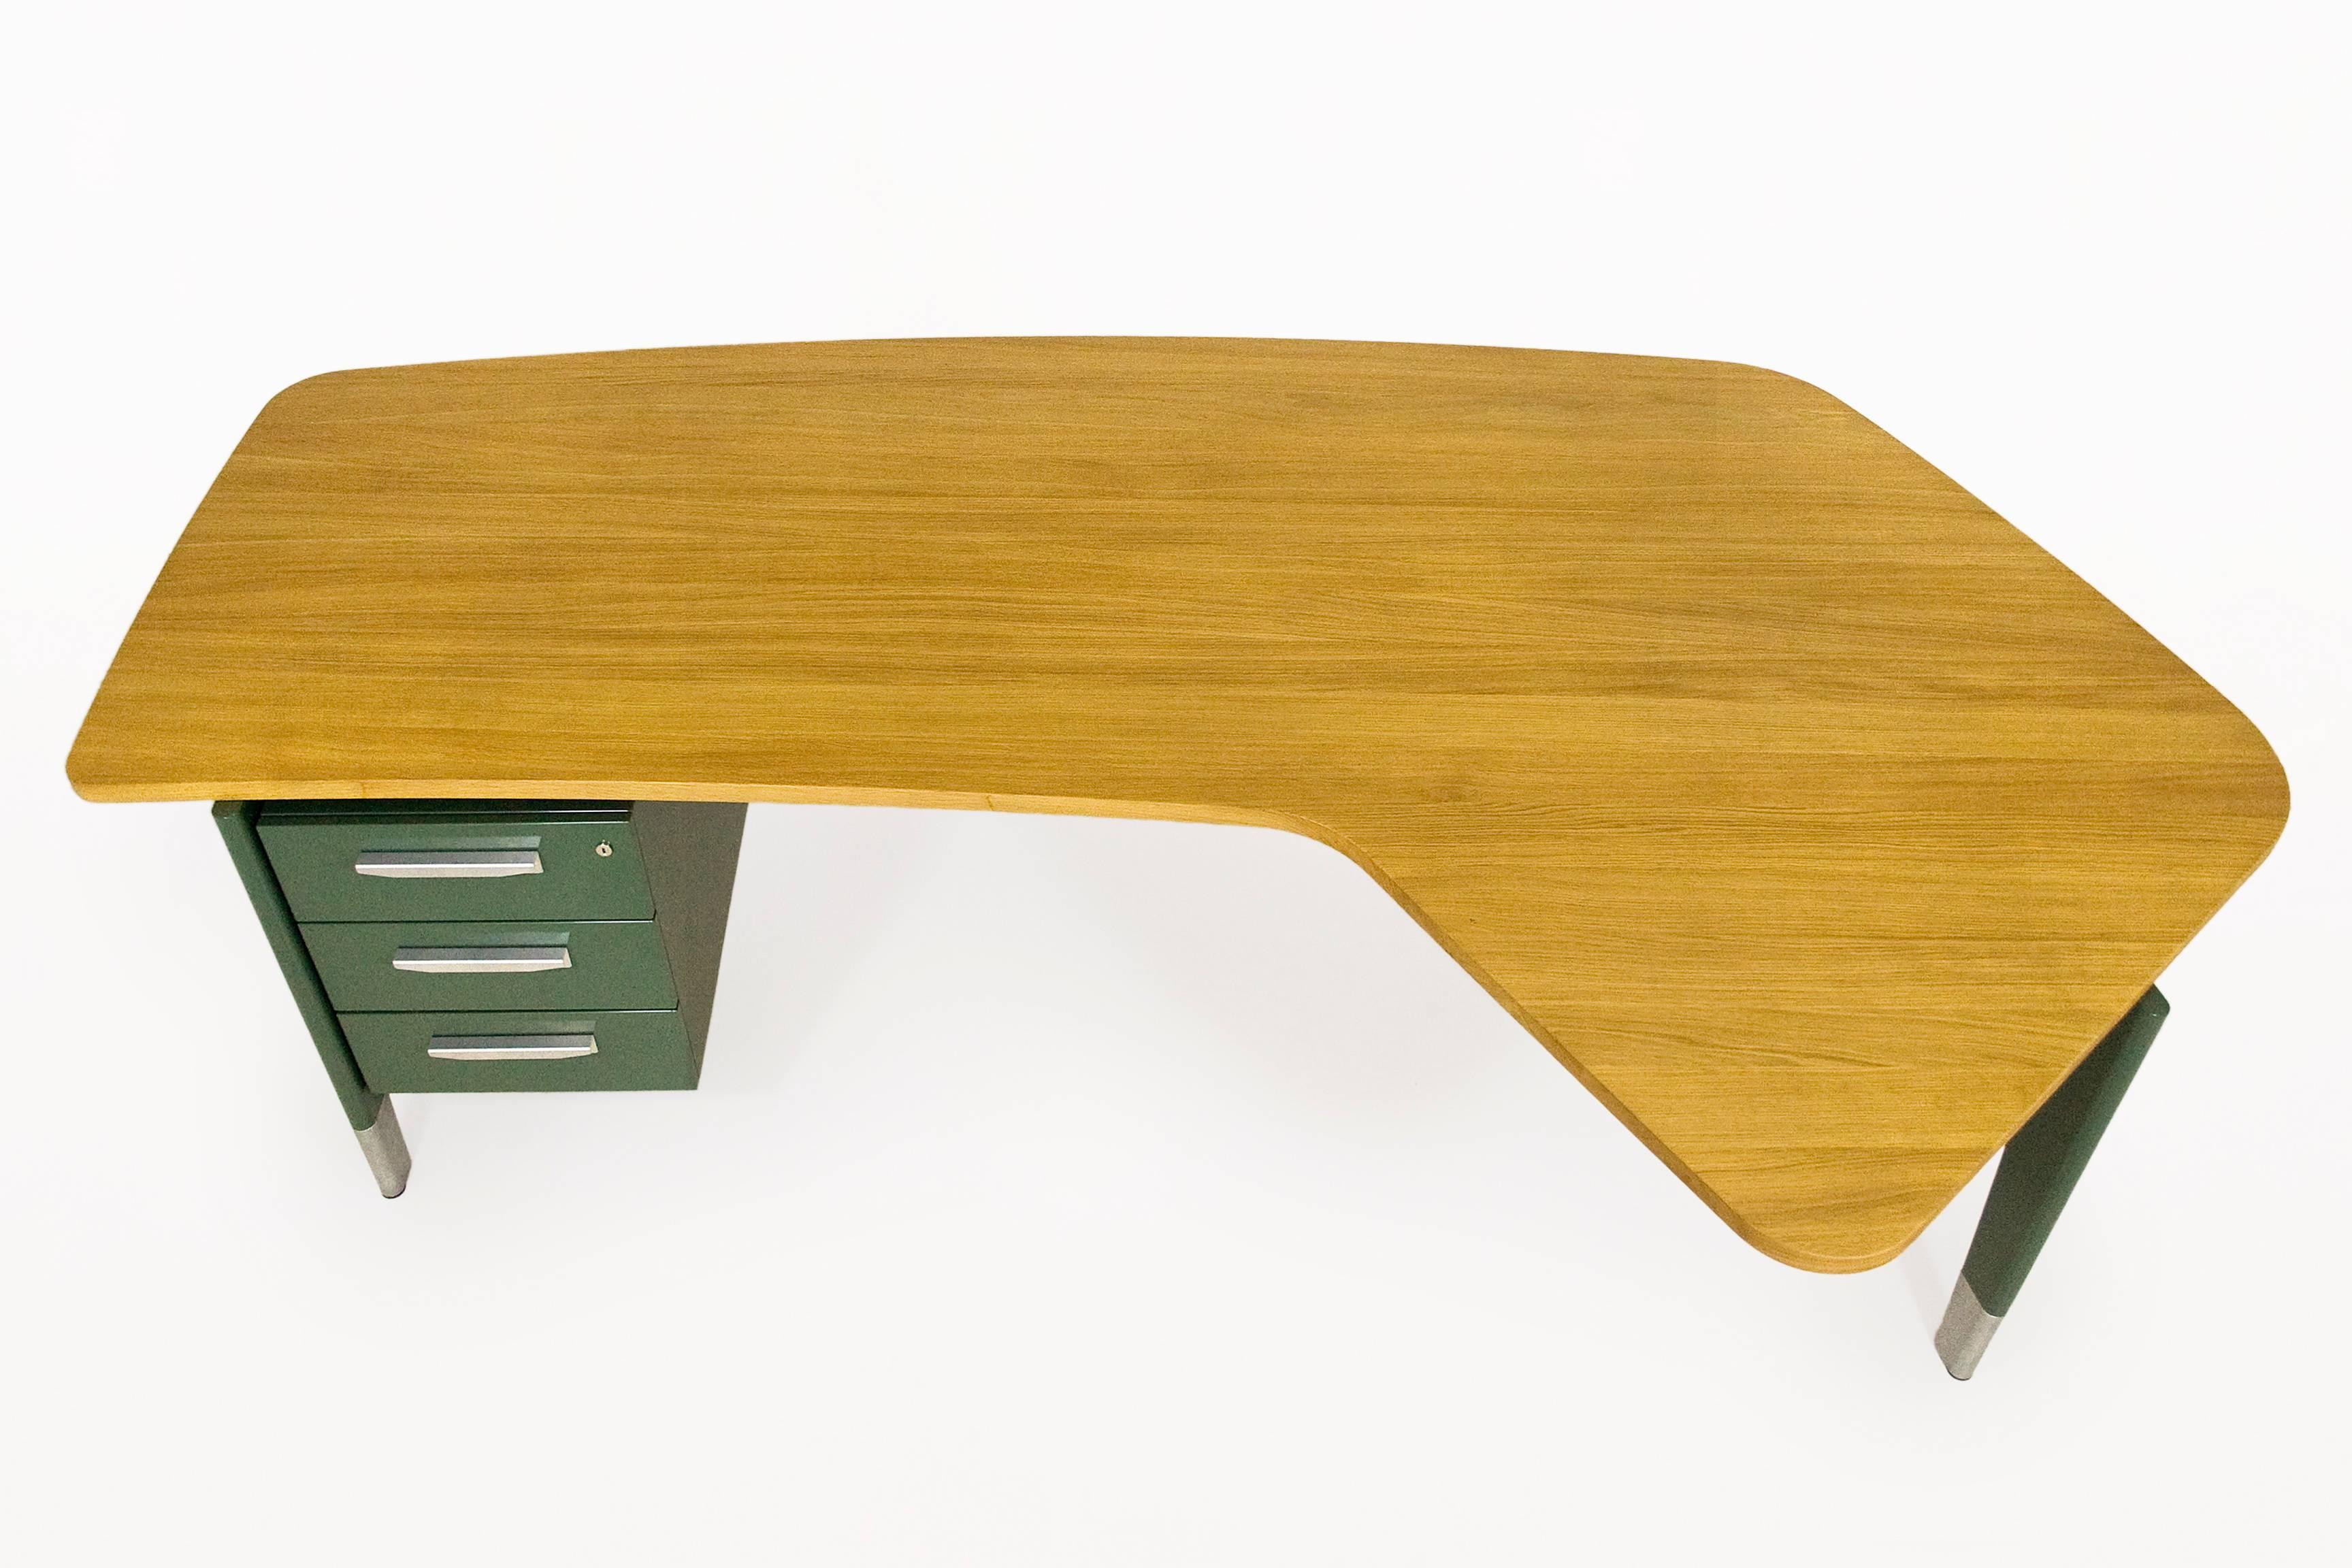 Jean Prouvé presidence desk
Lacquered bent steel
Stamped Vitra Edition
2015, France
Very good vintage condition.